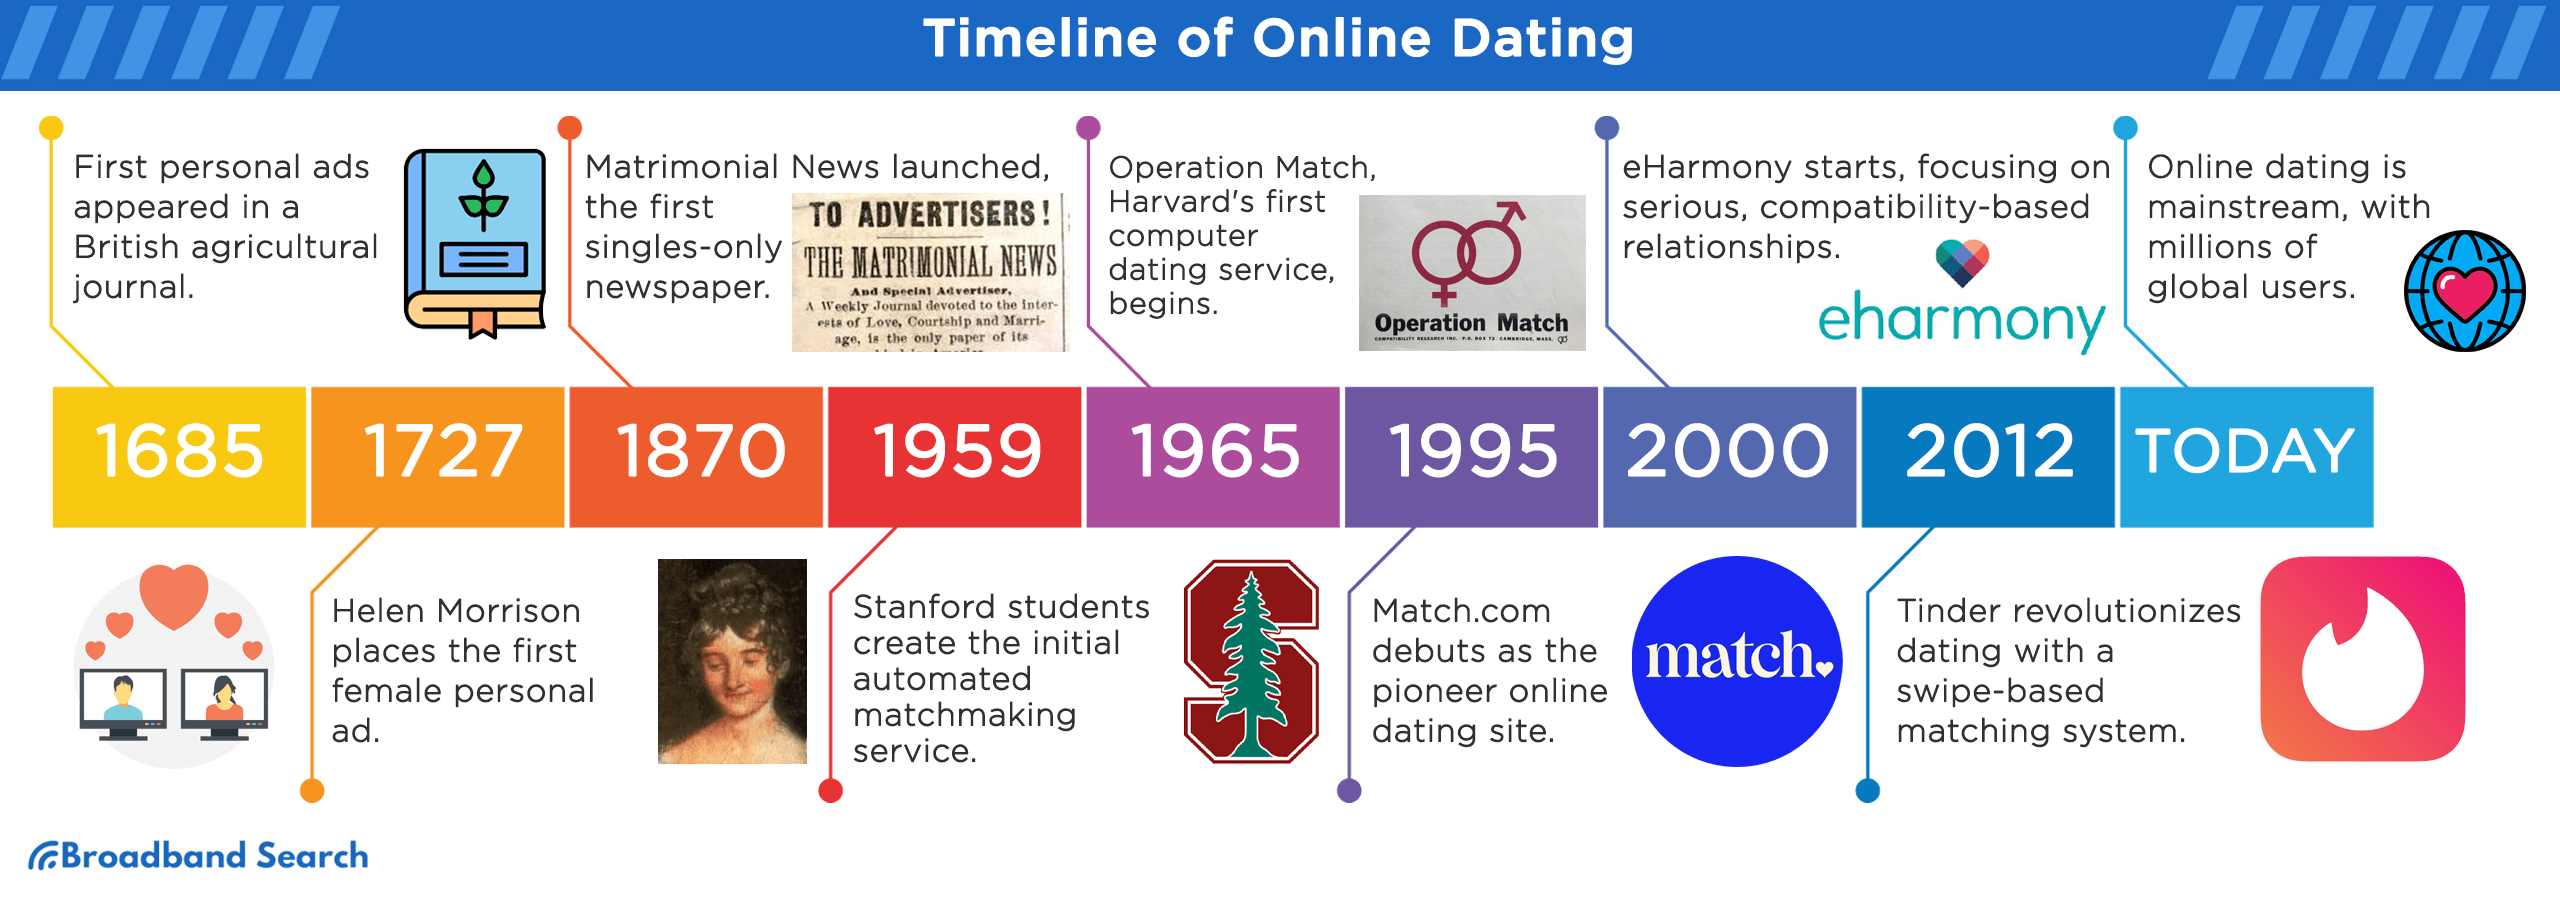 Timeline of Online dating from 1685 to present time